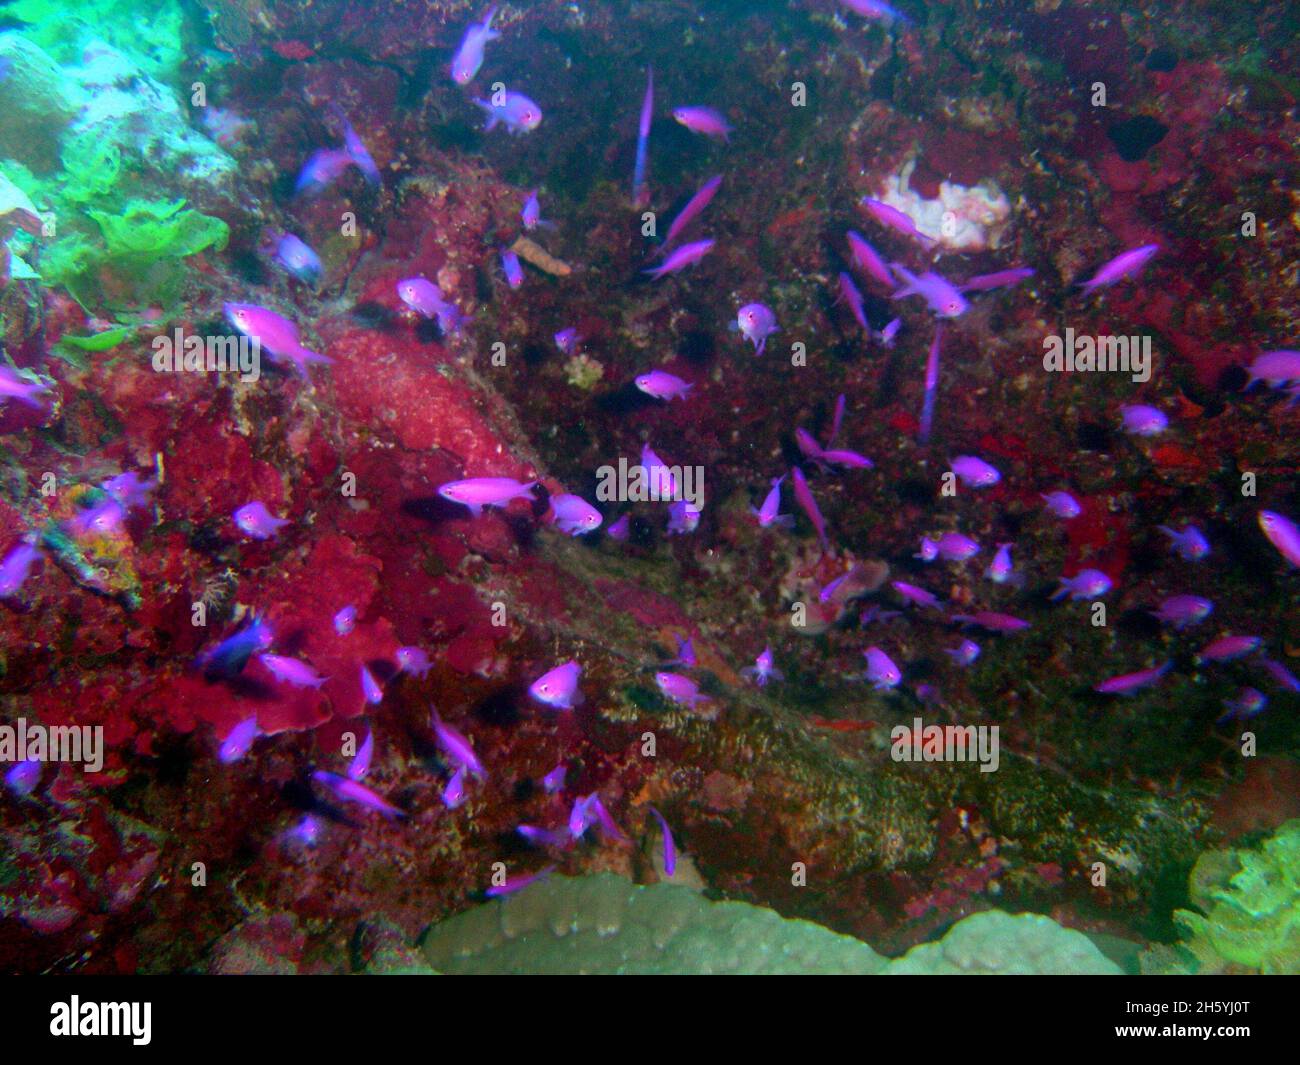 Reef scene with school of purple queen fish (Pseudanthias pascalus) Stock Photo